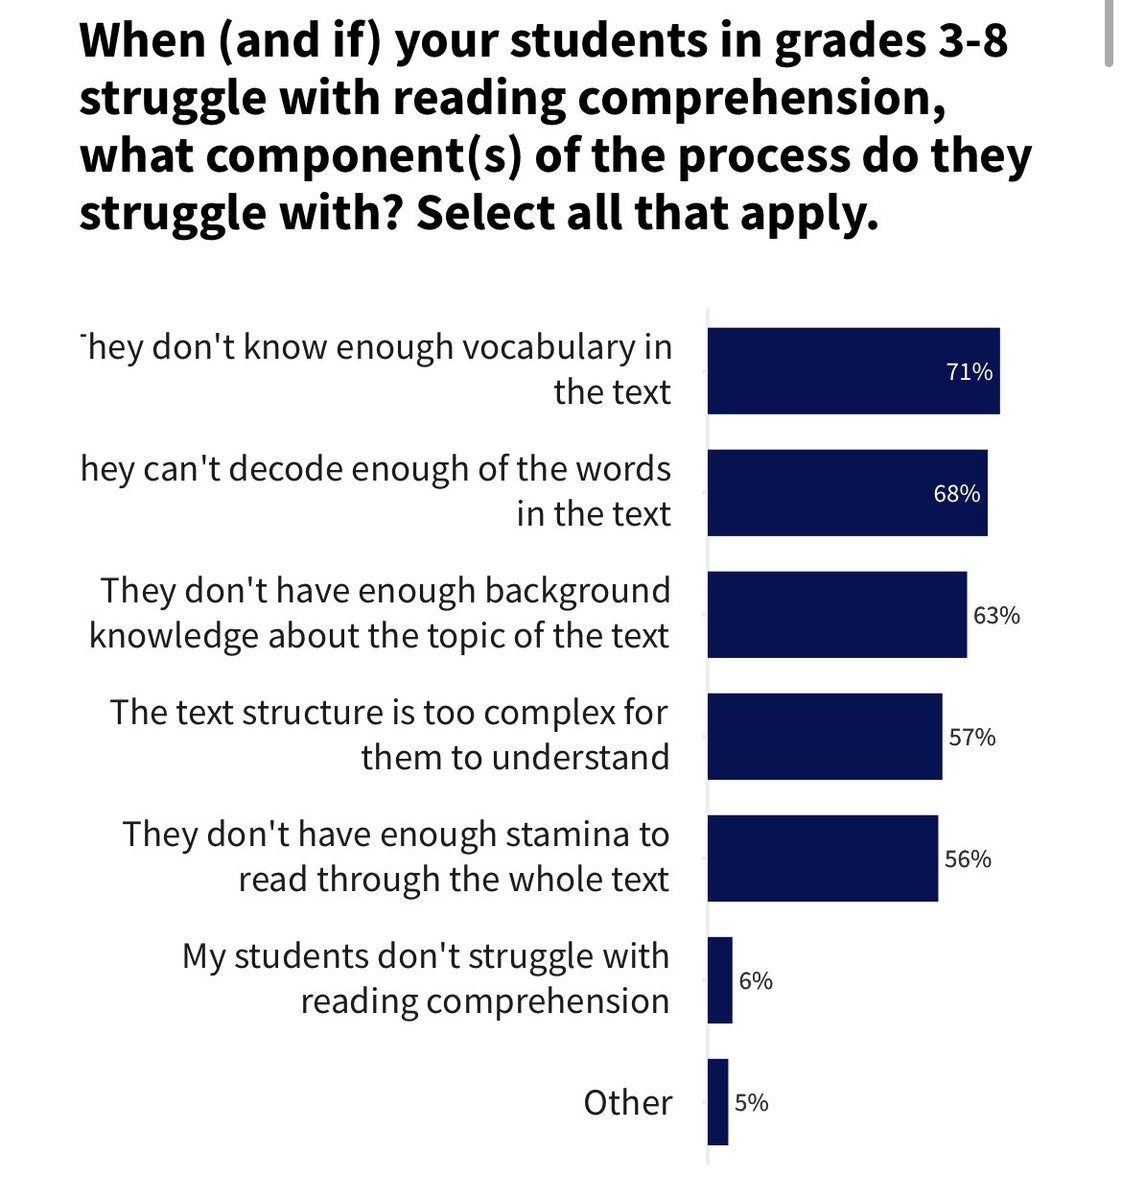 A very thoughtful piece by @Stephen_Sawchuk with images and charts to aide our comprehension OF comprehension! “Reading comprehension is a complex endeavor.” edweek.org/teaching-learn…… #knowledgematters